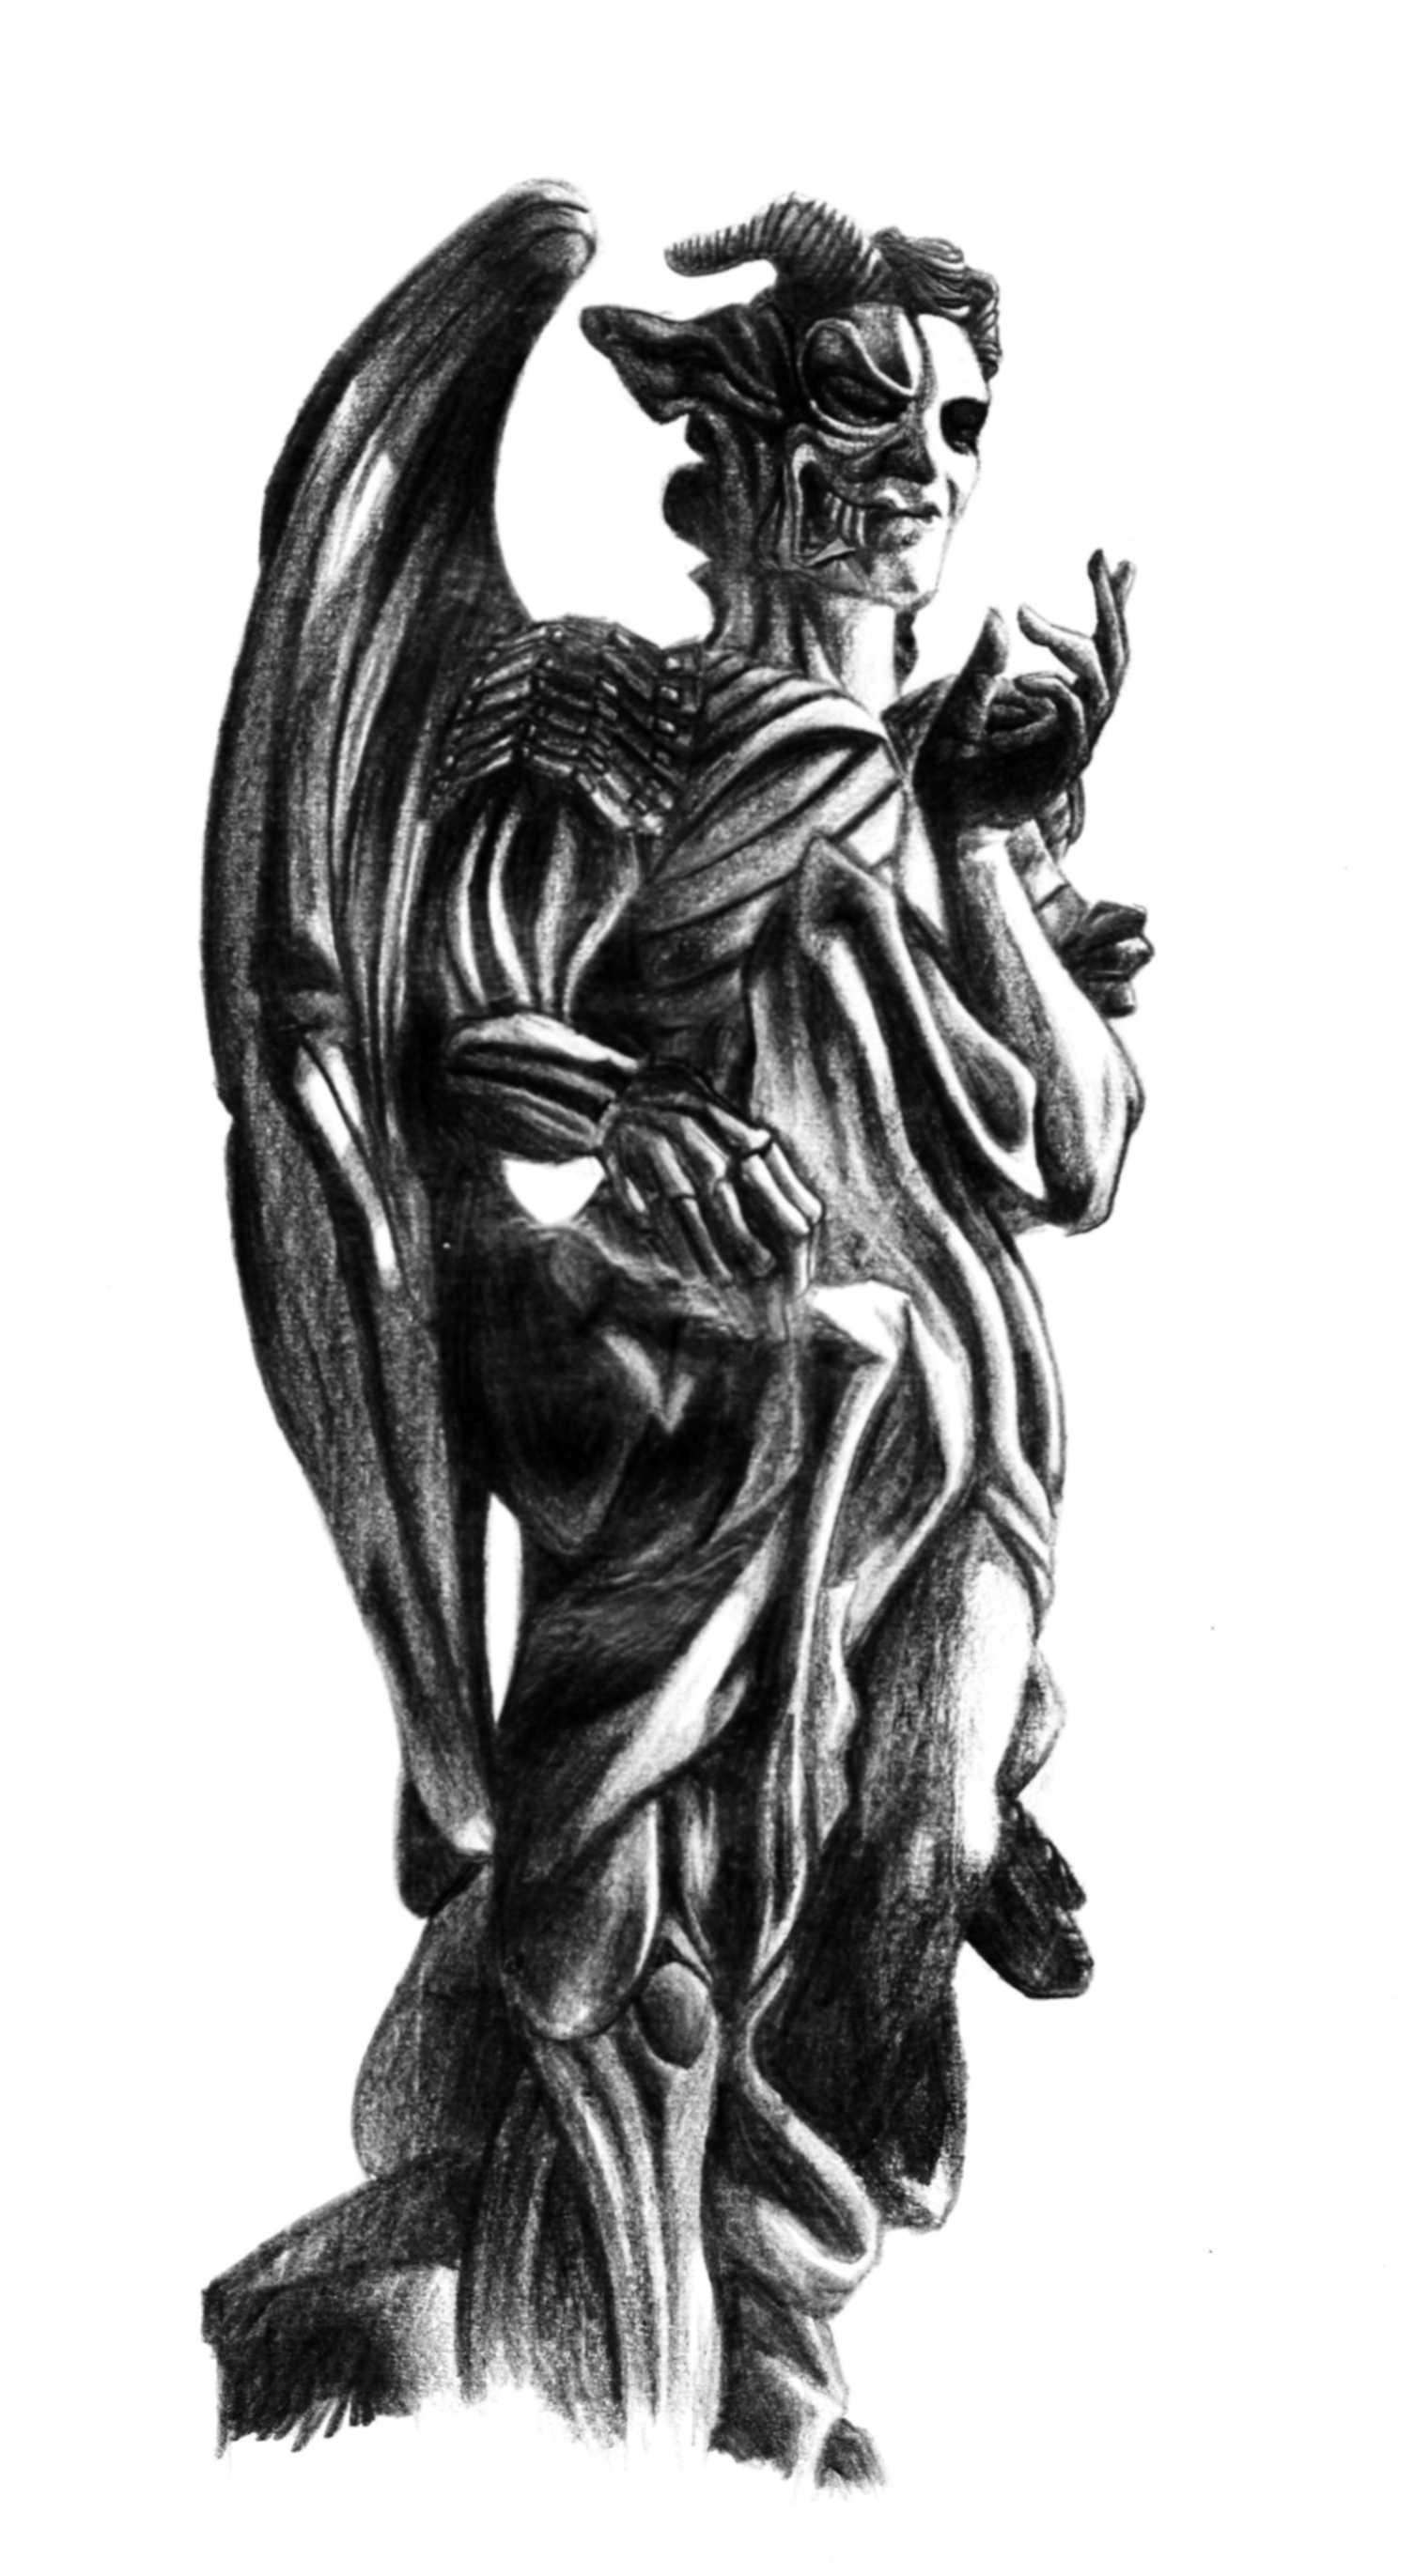 Demon Drawing Statue For Free Download - Angels And Demons Statue Design - HD Wallpaper 